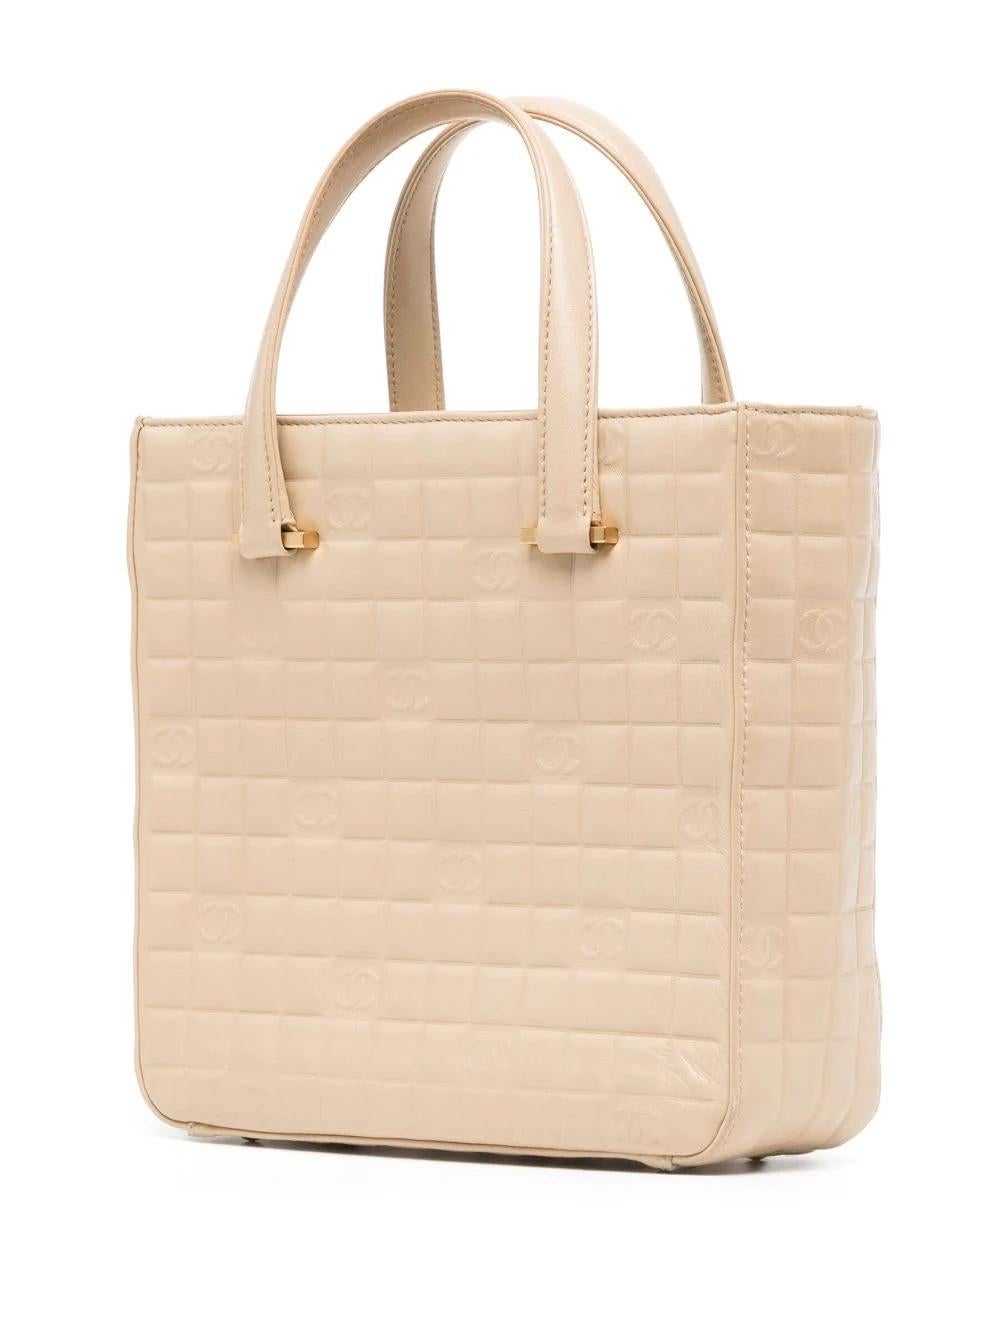 After the iconic interlocking CC logo, CHANEL’s diamond quilt is one of the brand’s most distinguishing features. Next in line is the Choco Bar quilt, displayed on this beige handbag in a small, symmetrical pattern of square-shaped stitching in